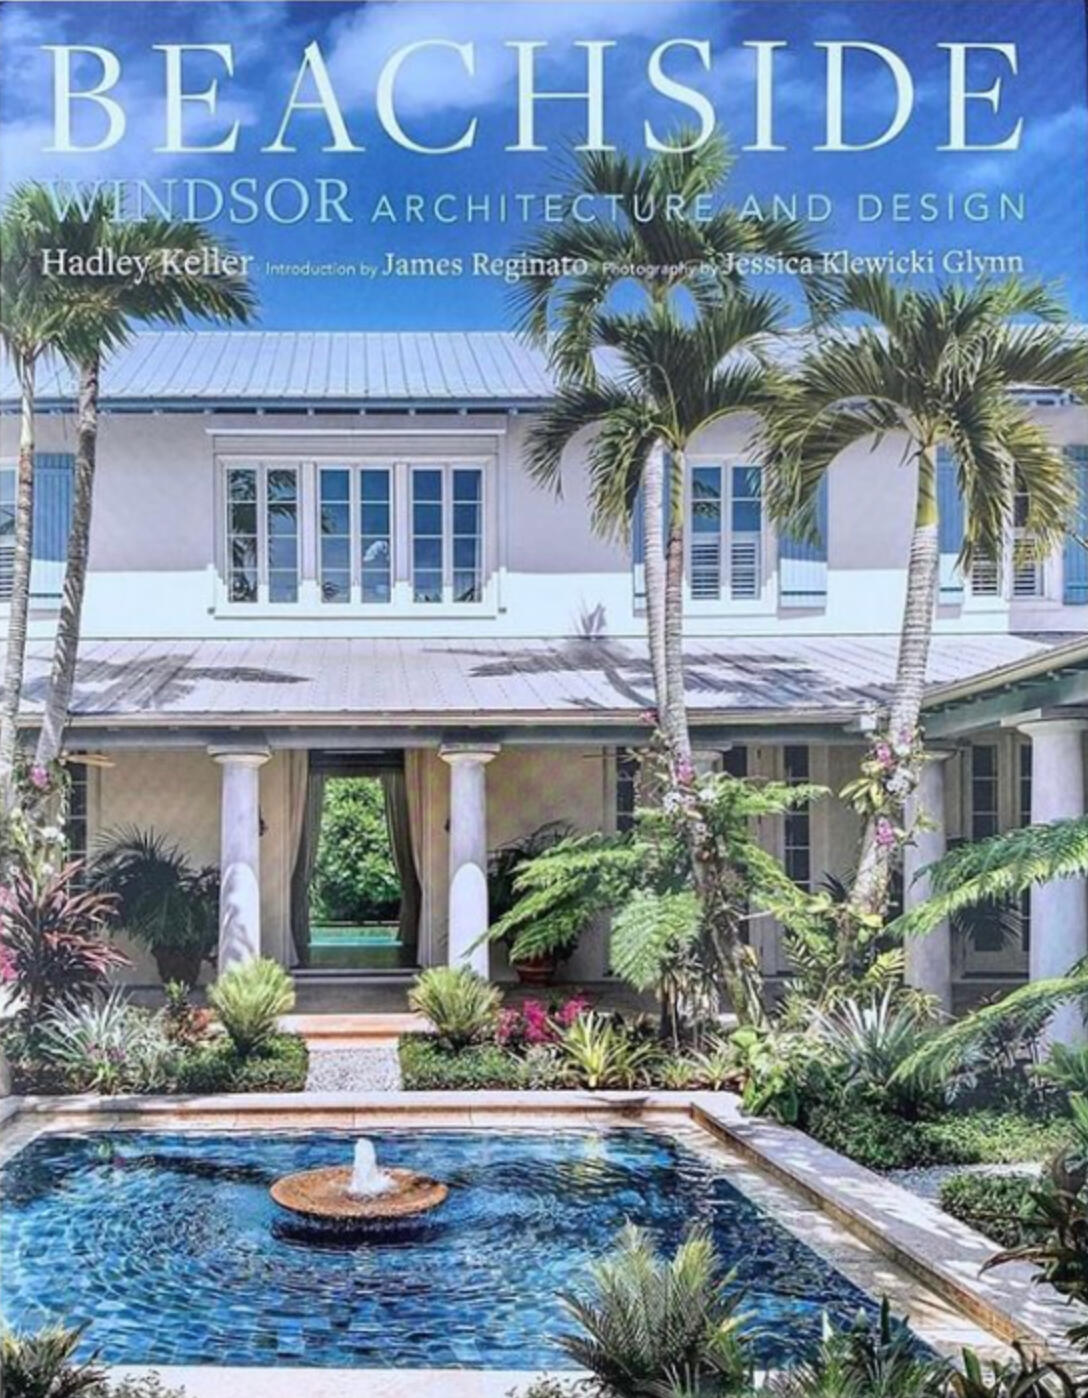 Beachside: Windsor Architecture and Design by Hadley Keller, Introduction by James Reginato, Photography by Jessica Klewicki Glynn